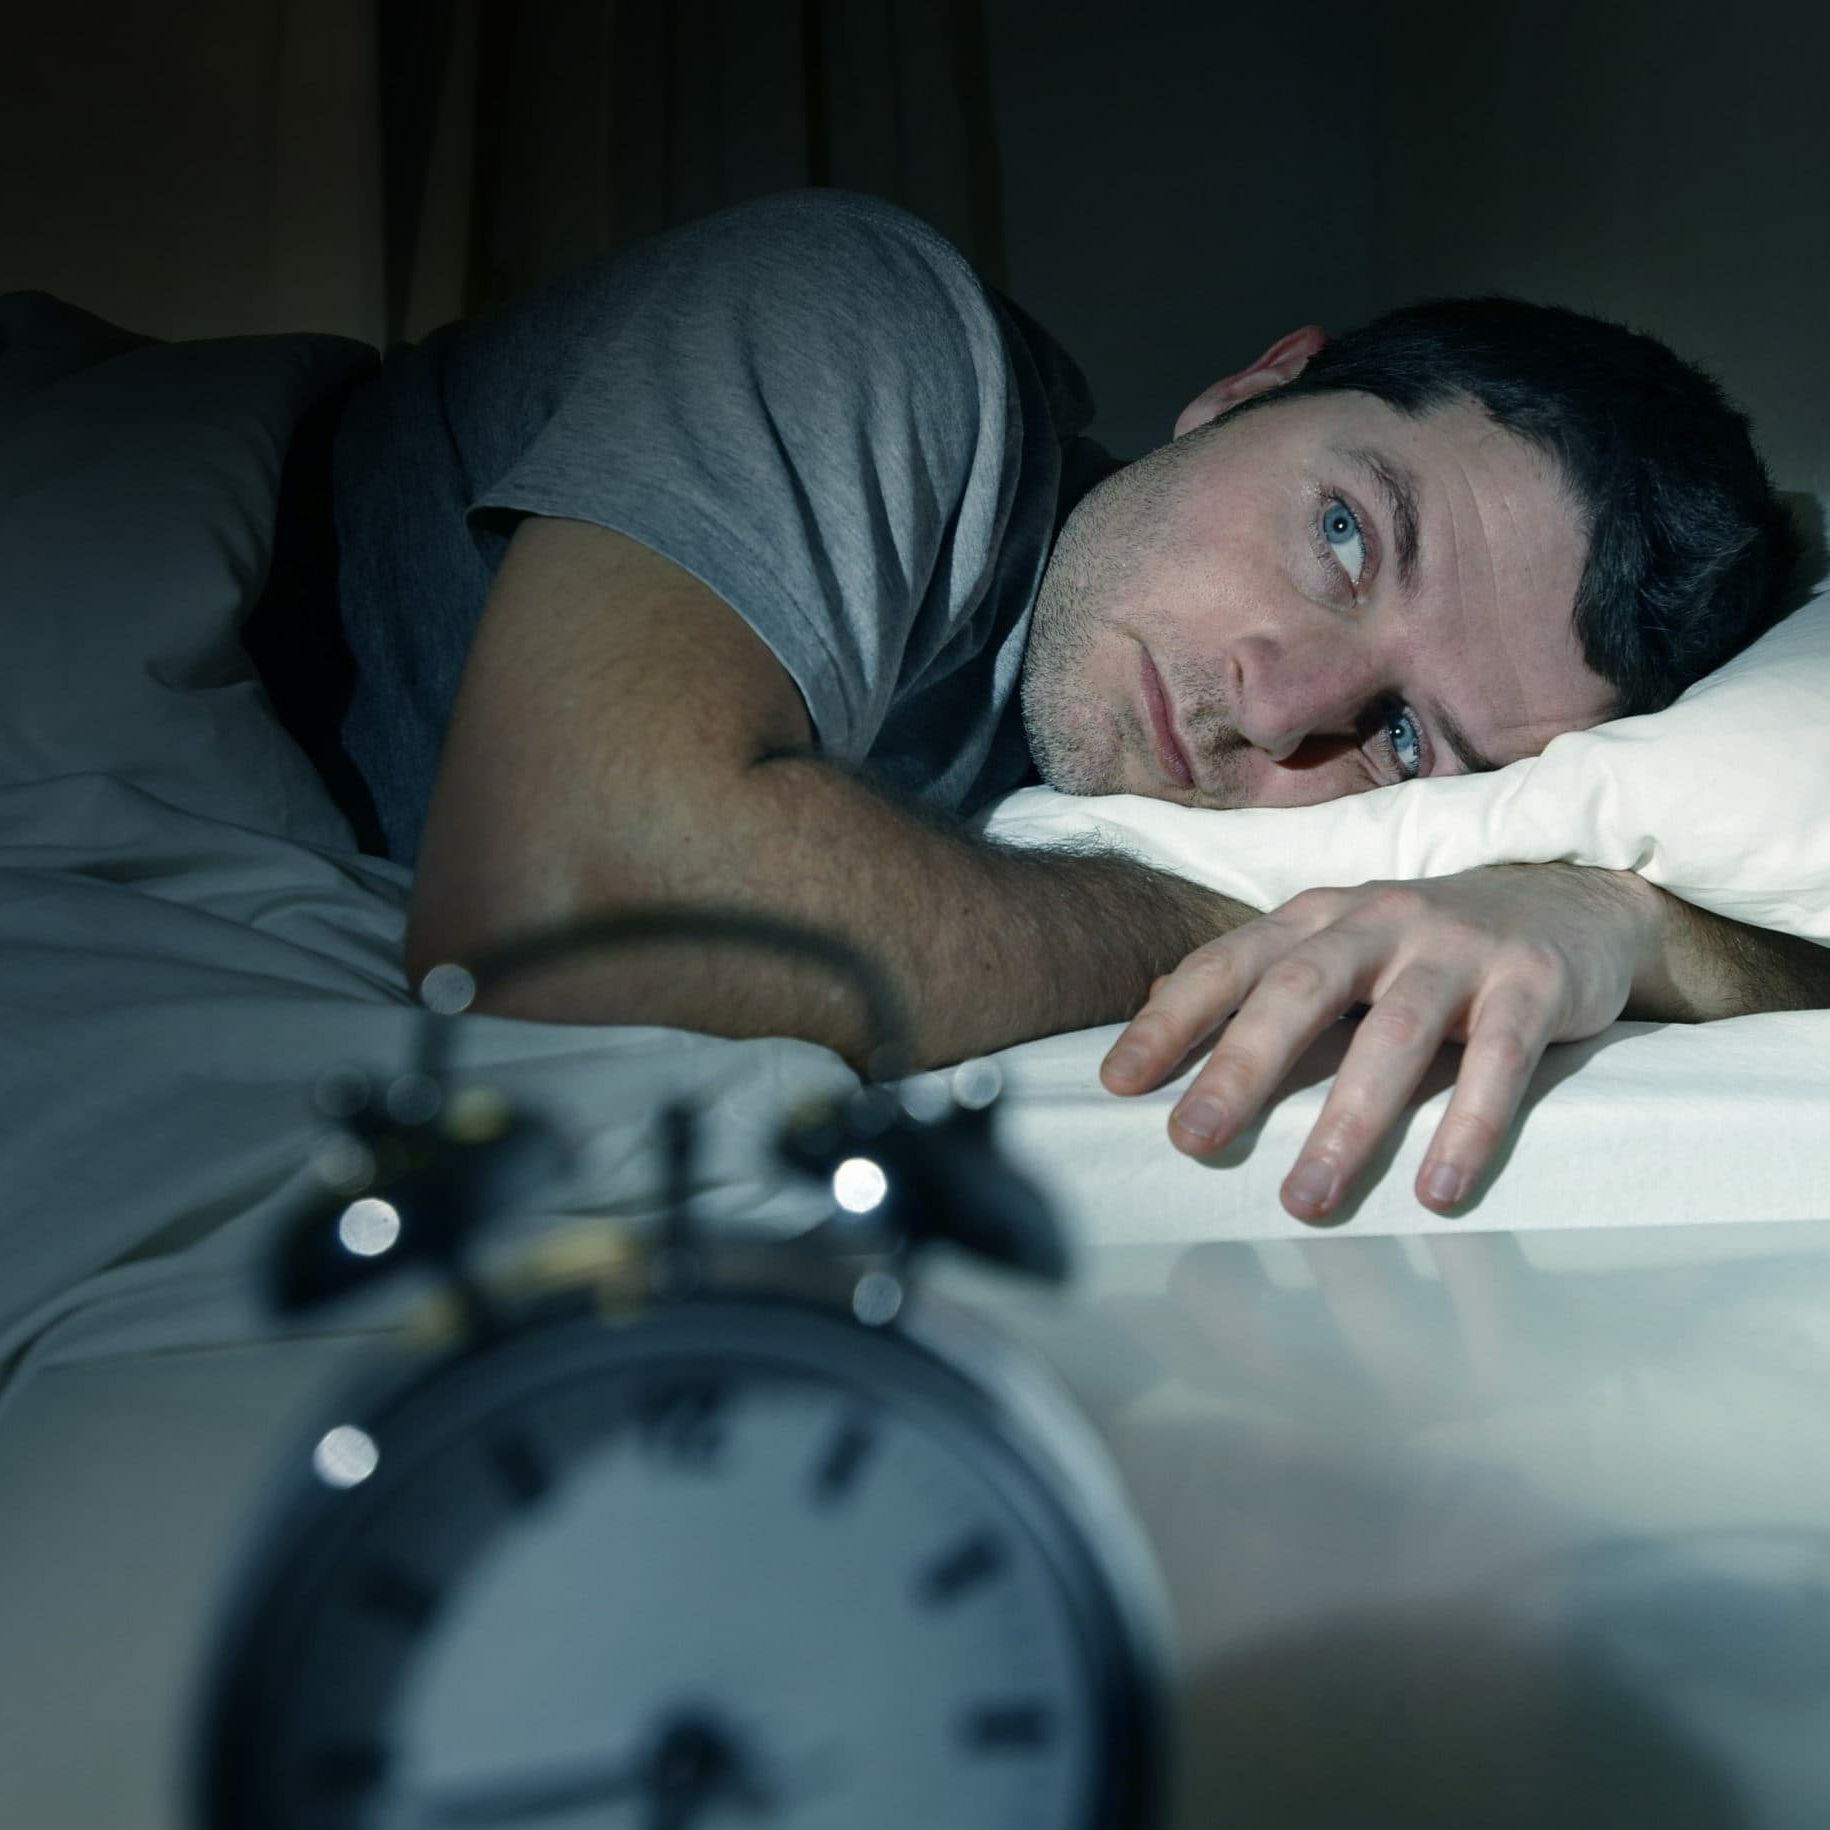 insomina and sleep problems solved by hypnosis